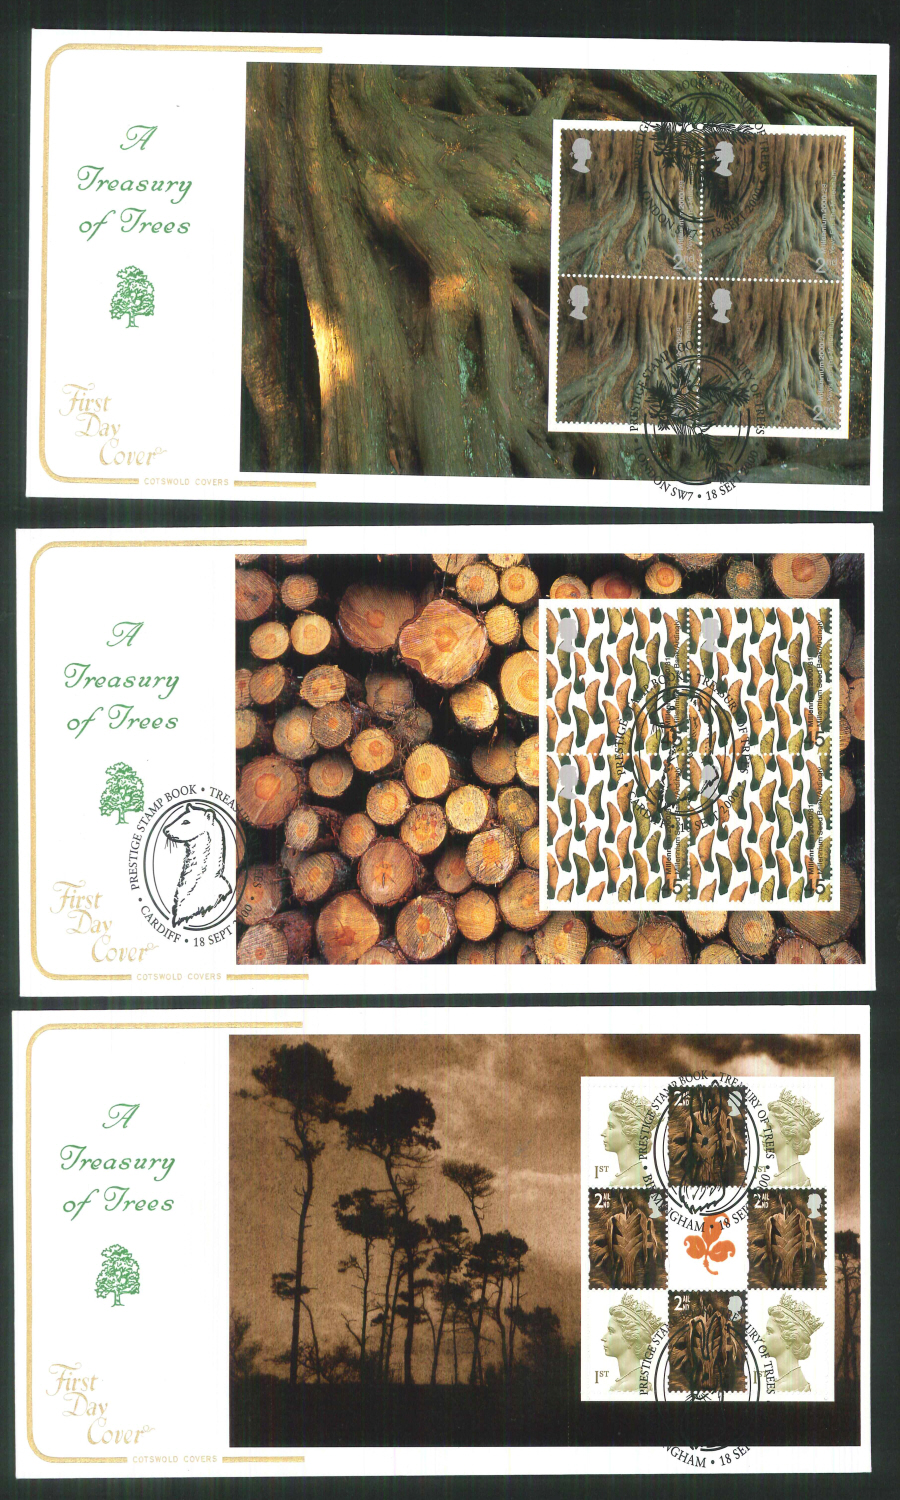 2000 - Cotswold Treasury of Trees- Prestige Stamp Book Set of 4 Covers - Various Postmarks